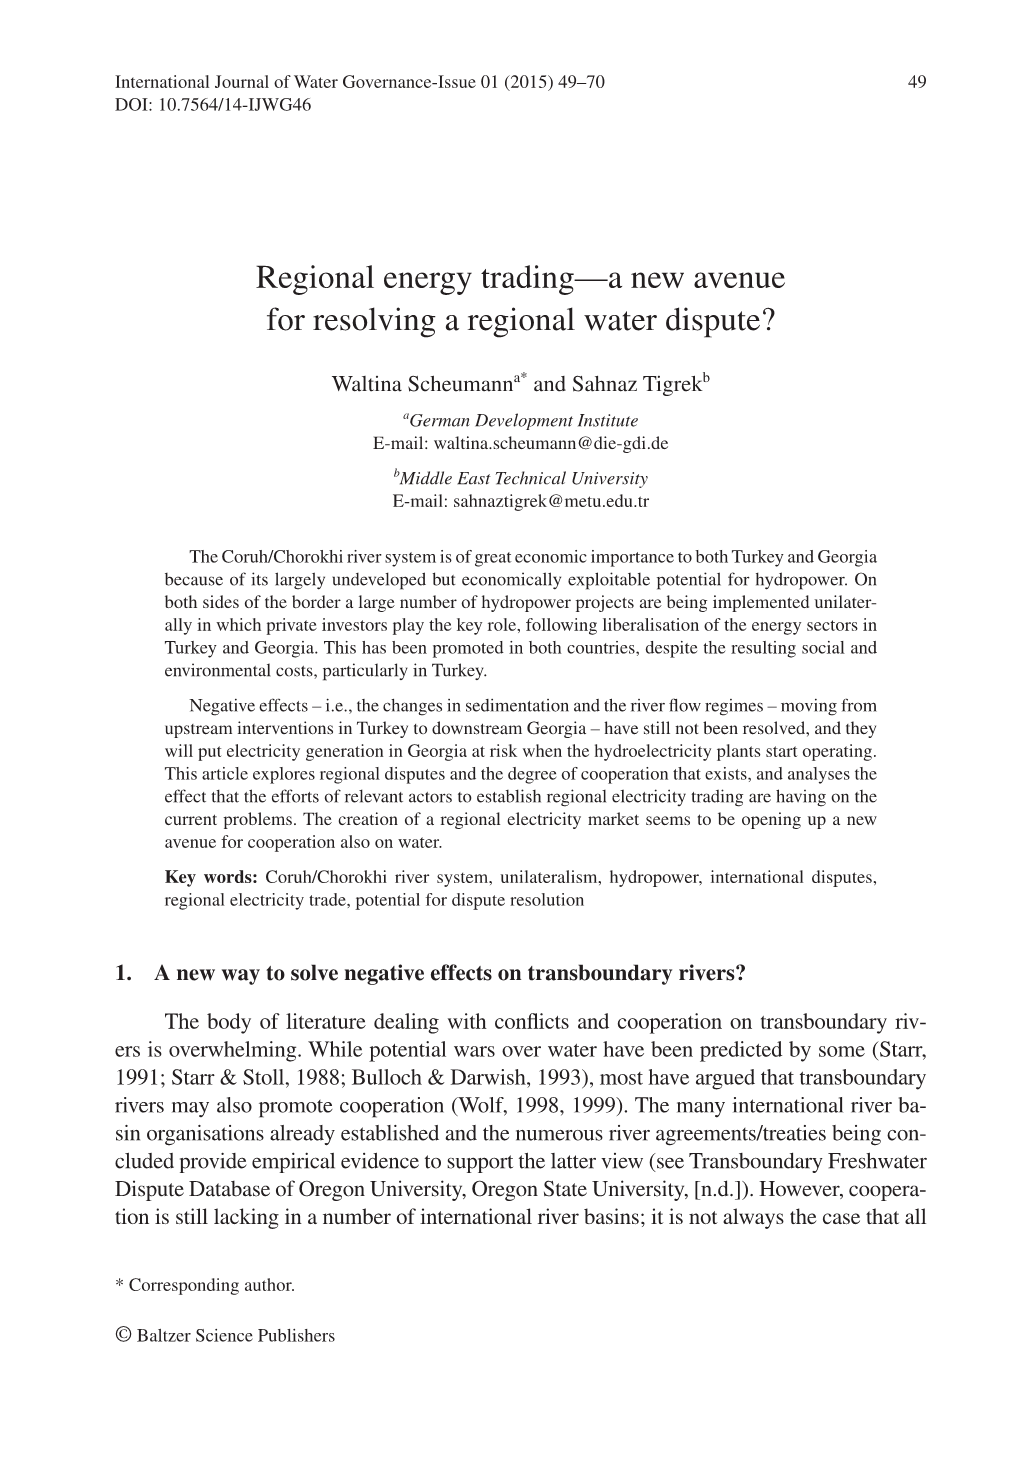 Regional Energy Trading—A New Avenue for Resolving a Regional Water Dispute?